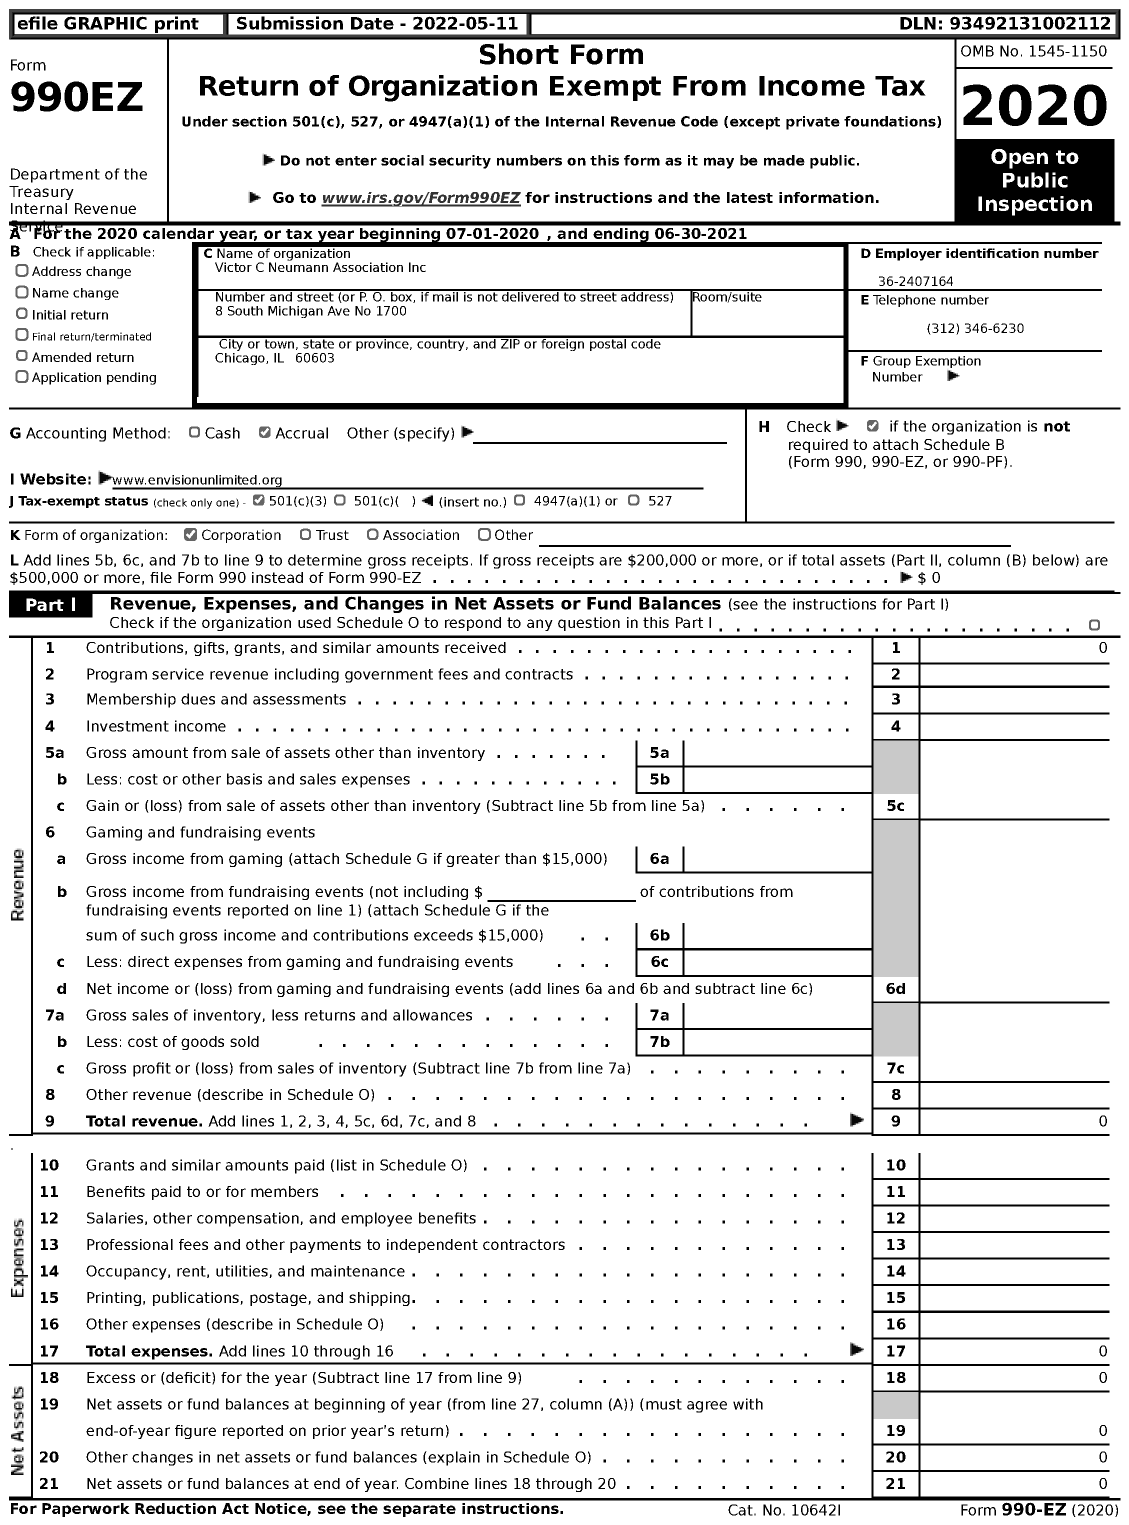 Image of first page of 2020 Form 990EZ for envision UNLIMITED / Neumann Family Services